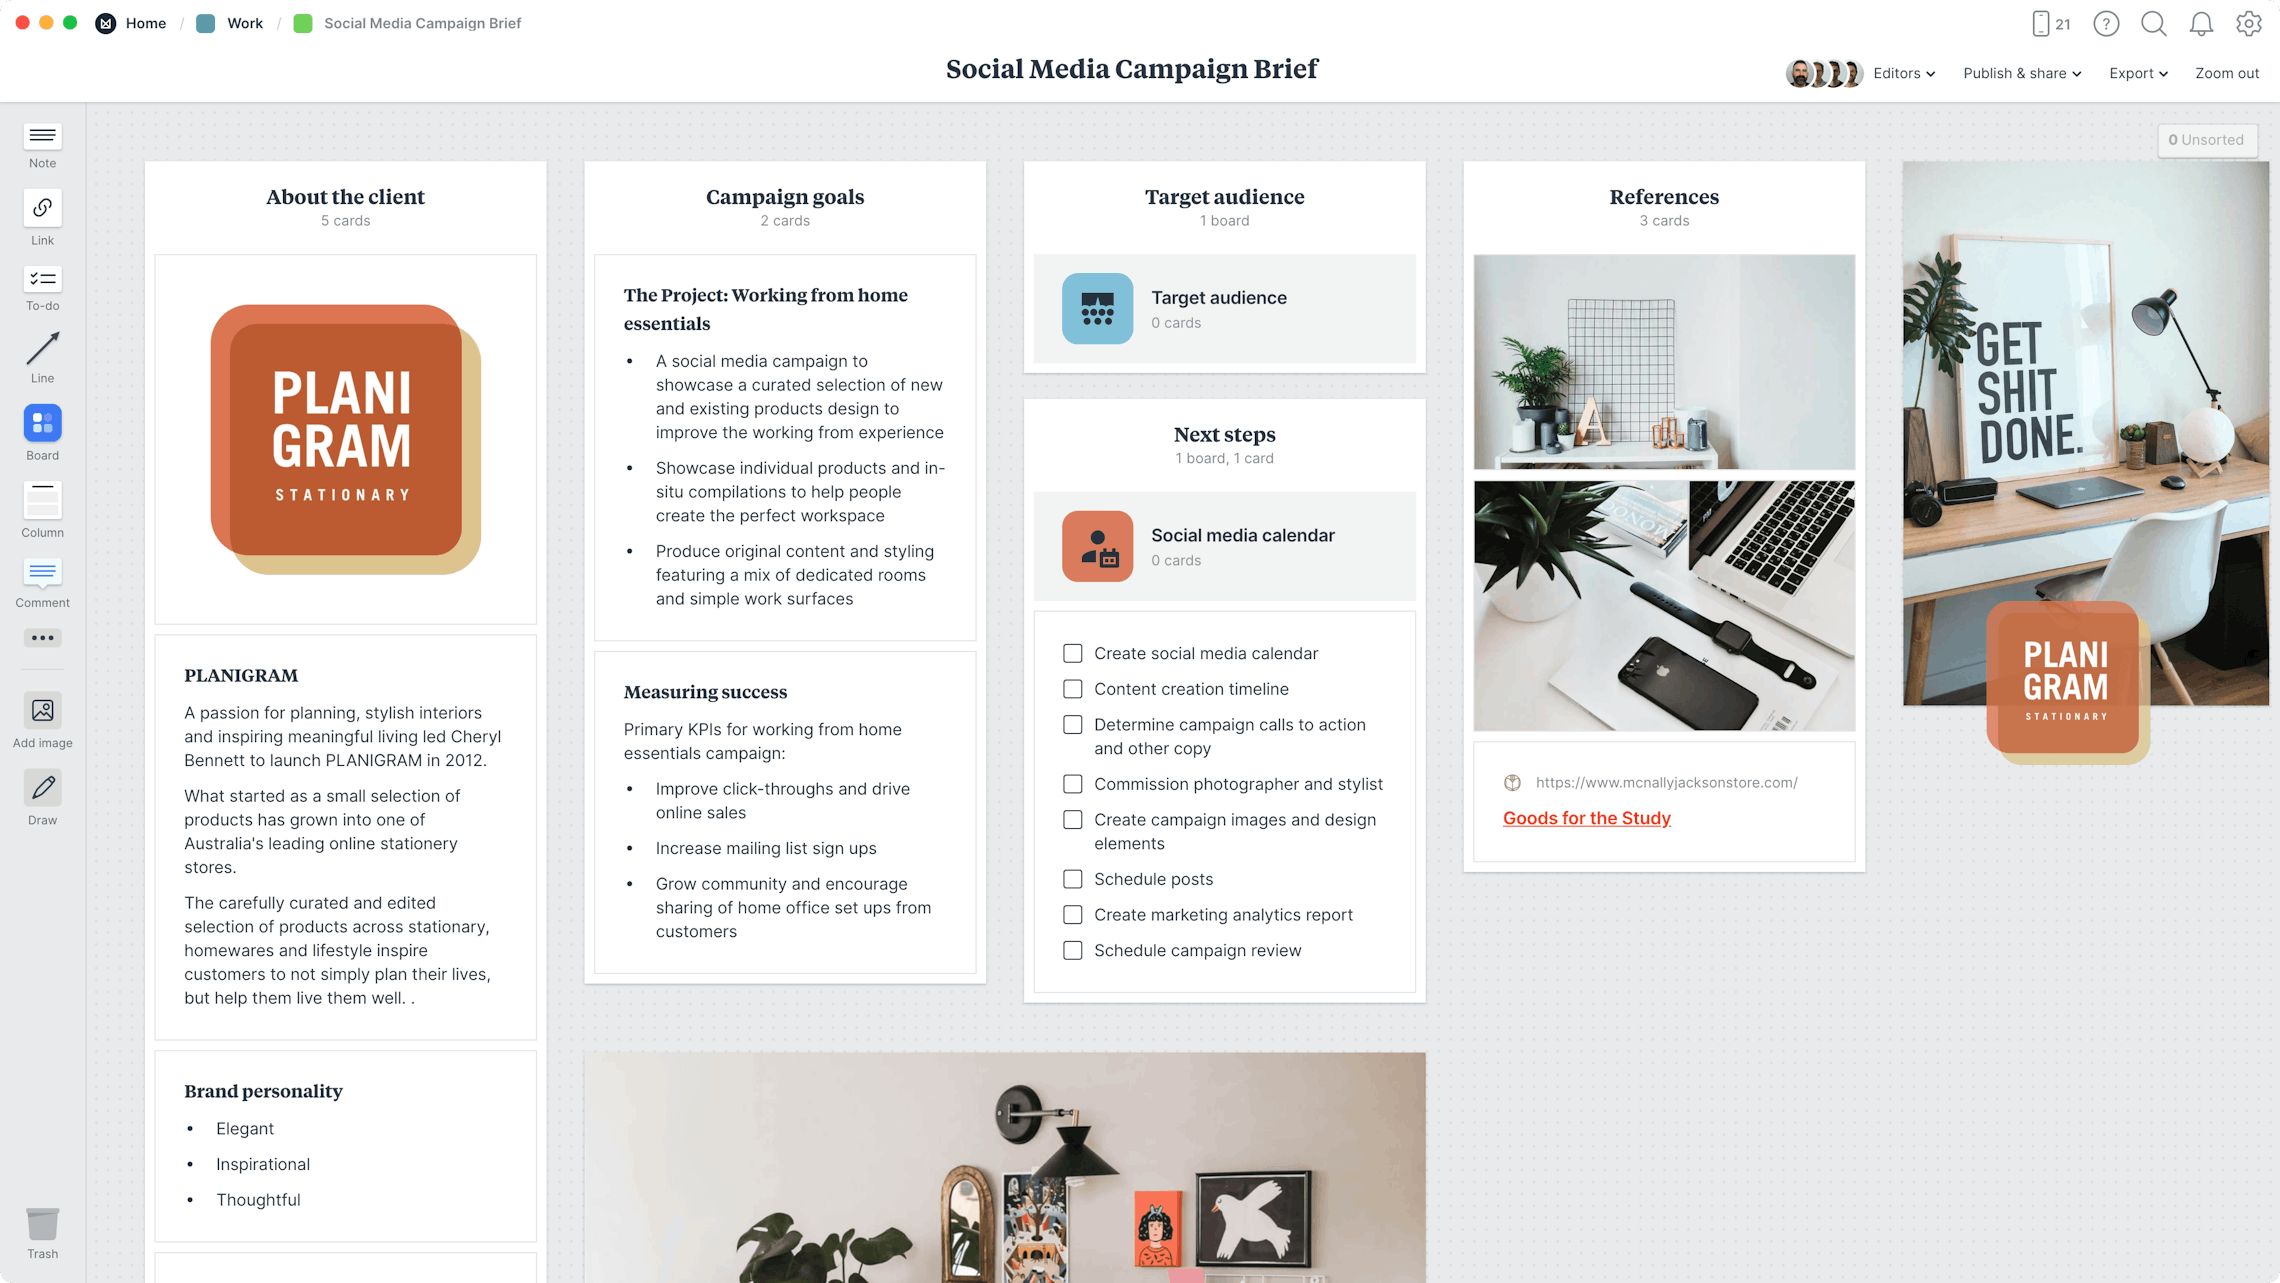 Social Media Campaign Brief Template, within the Milanote app